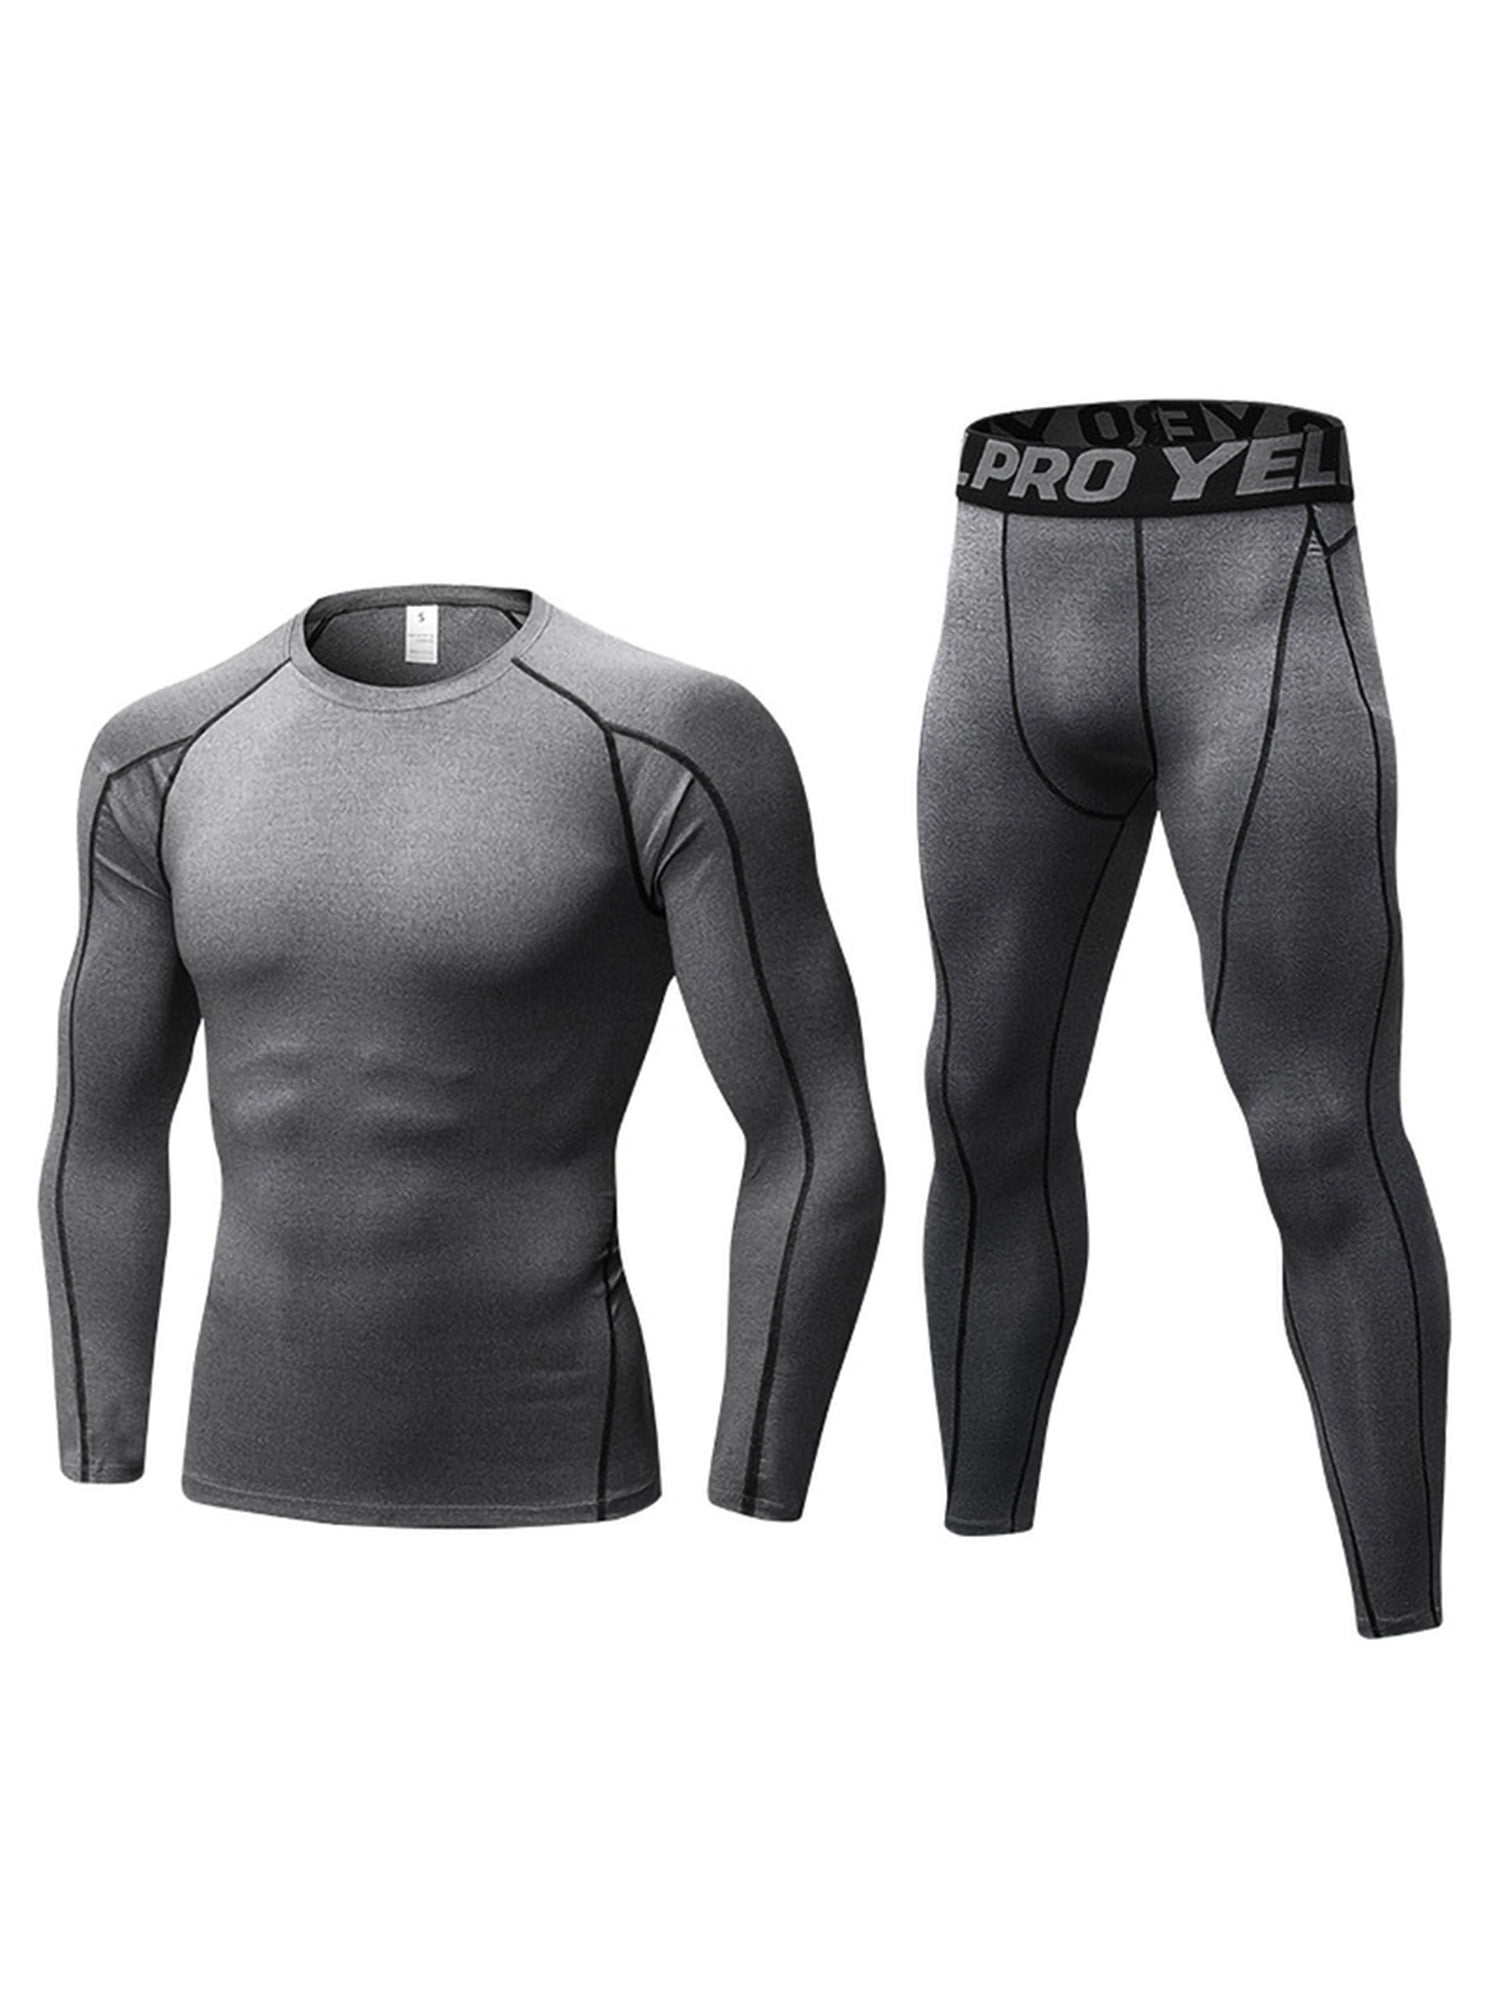 Mens Sports Gym Compression T-shirt Under Pants Athletic Tight Fitness Leggings